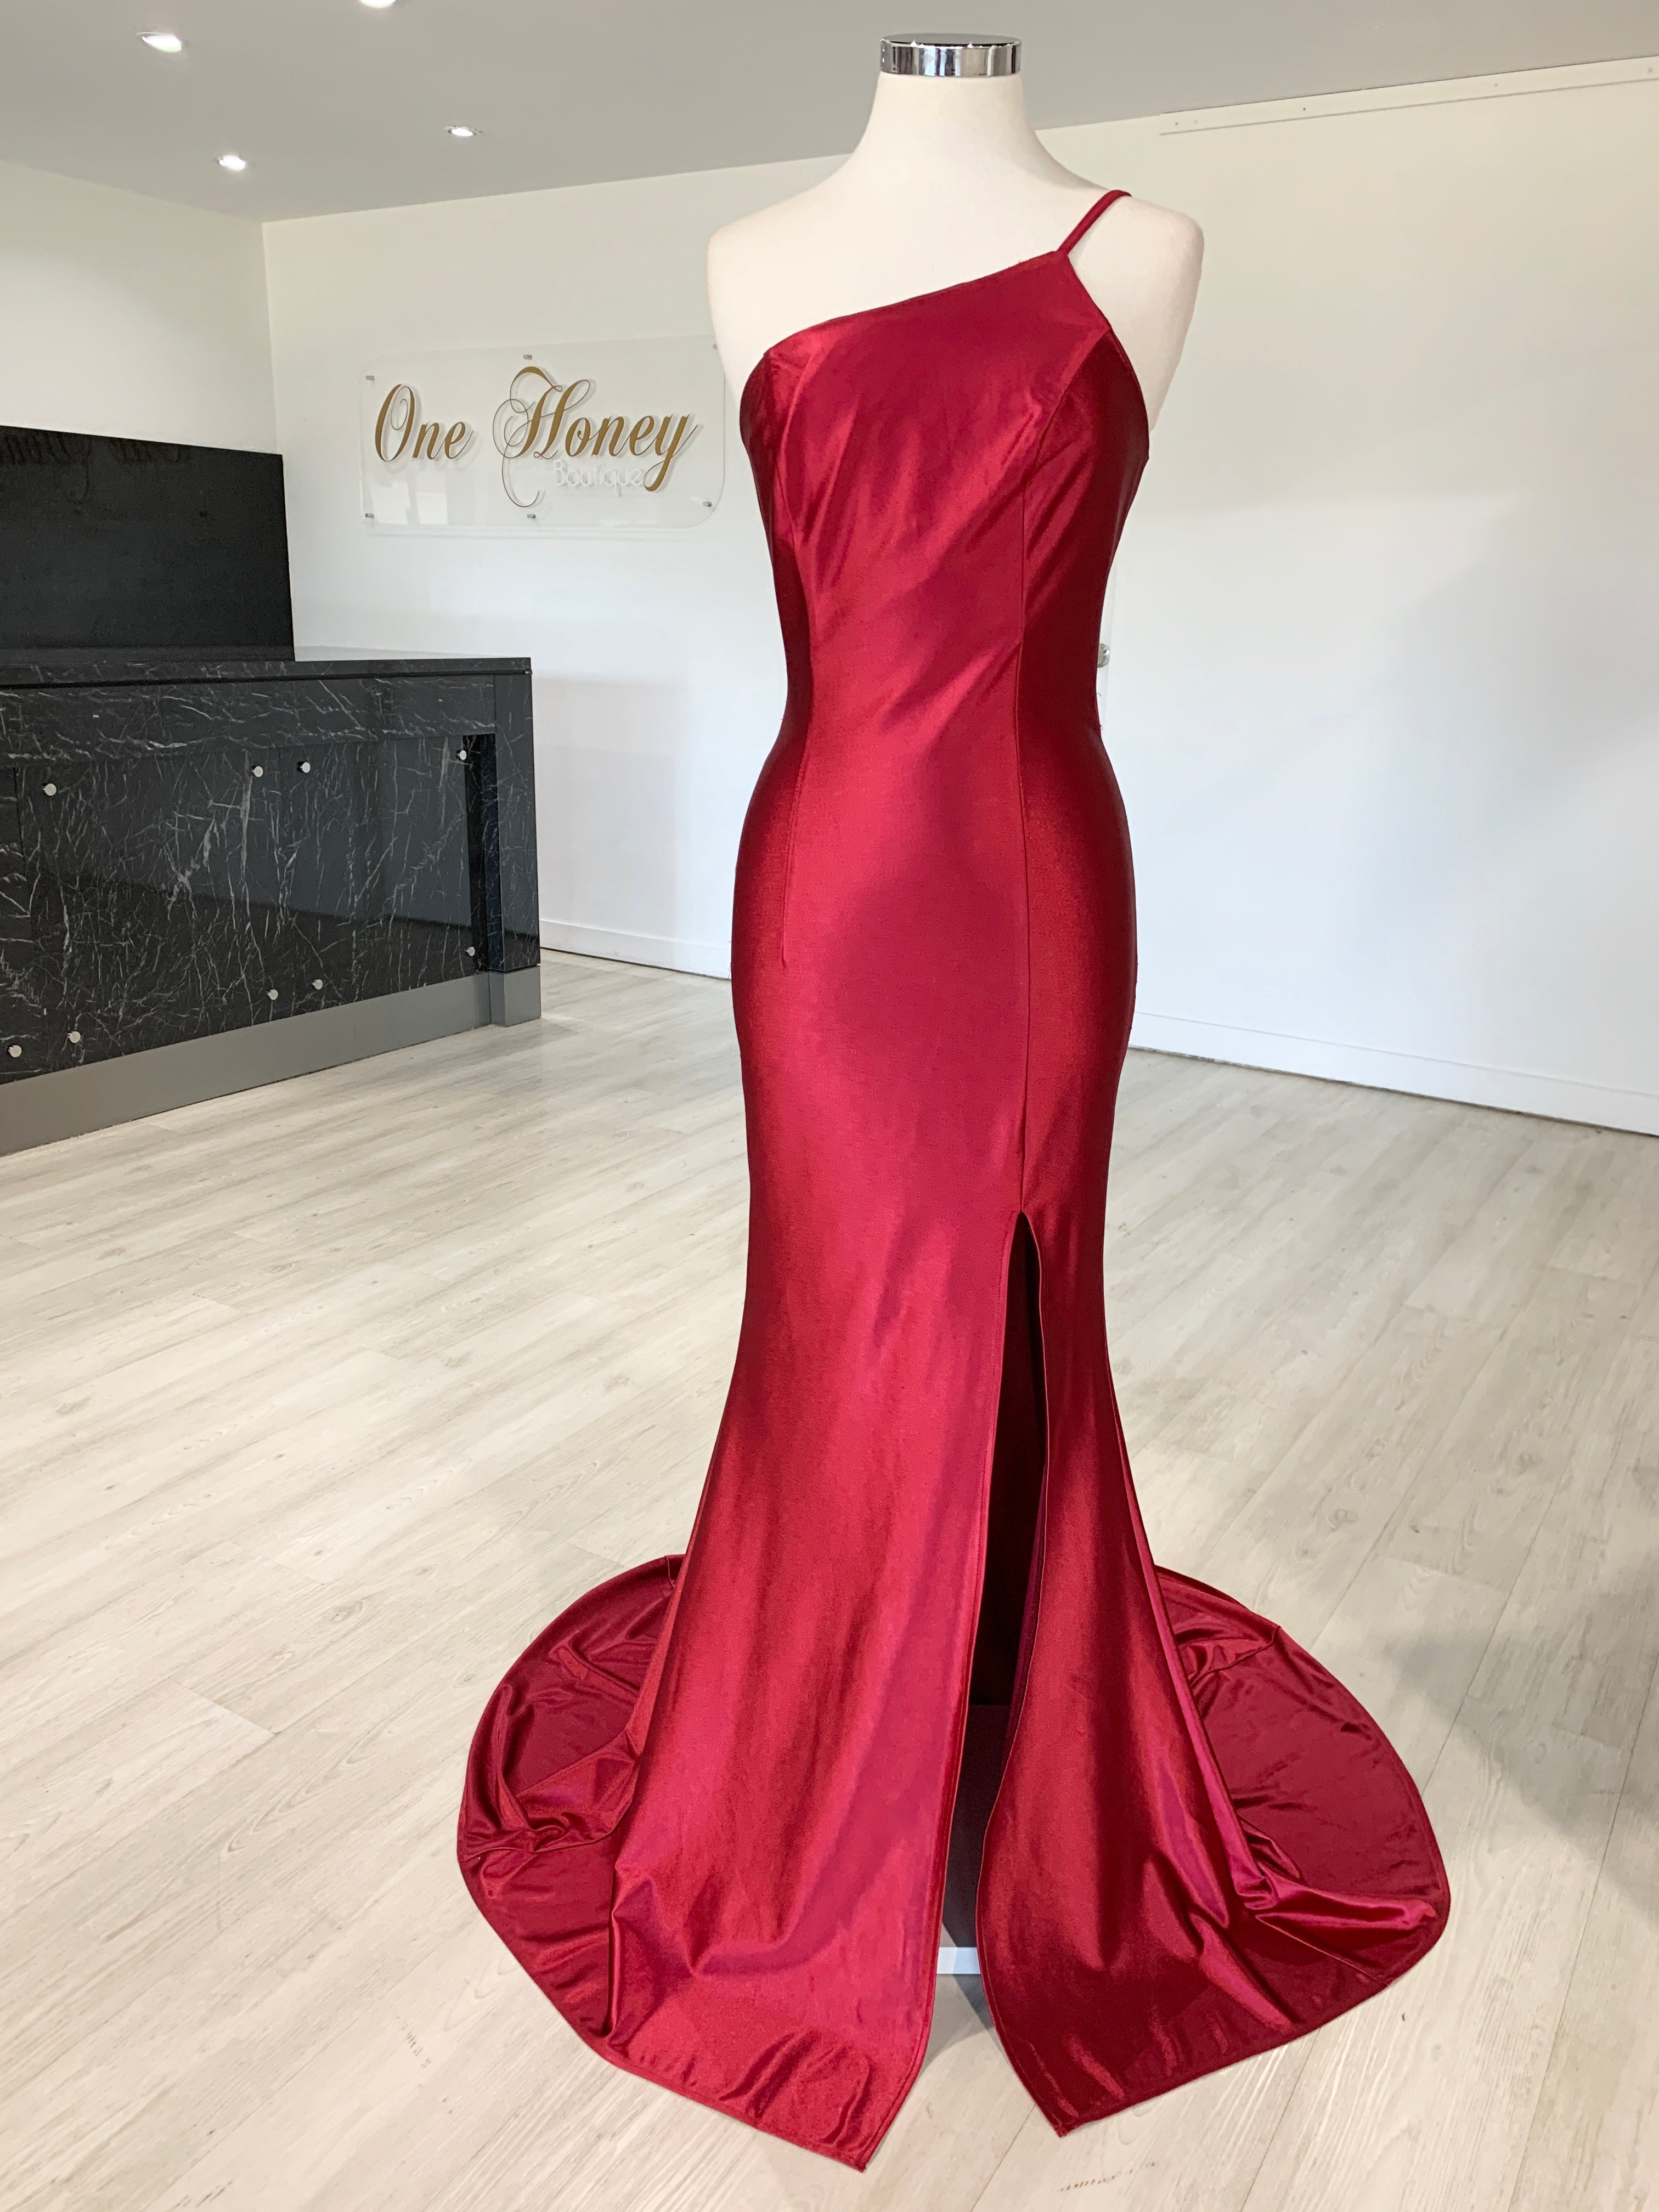 Honey Couture ANNABELL Burgundy One Shoulder Mermaid Evening Gown Dress {vendor} AfterPay Humm ZipPay LayBuy Sezzle